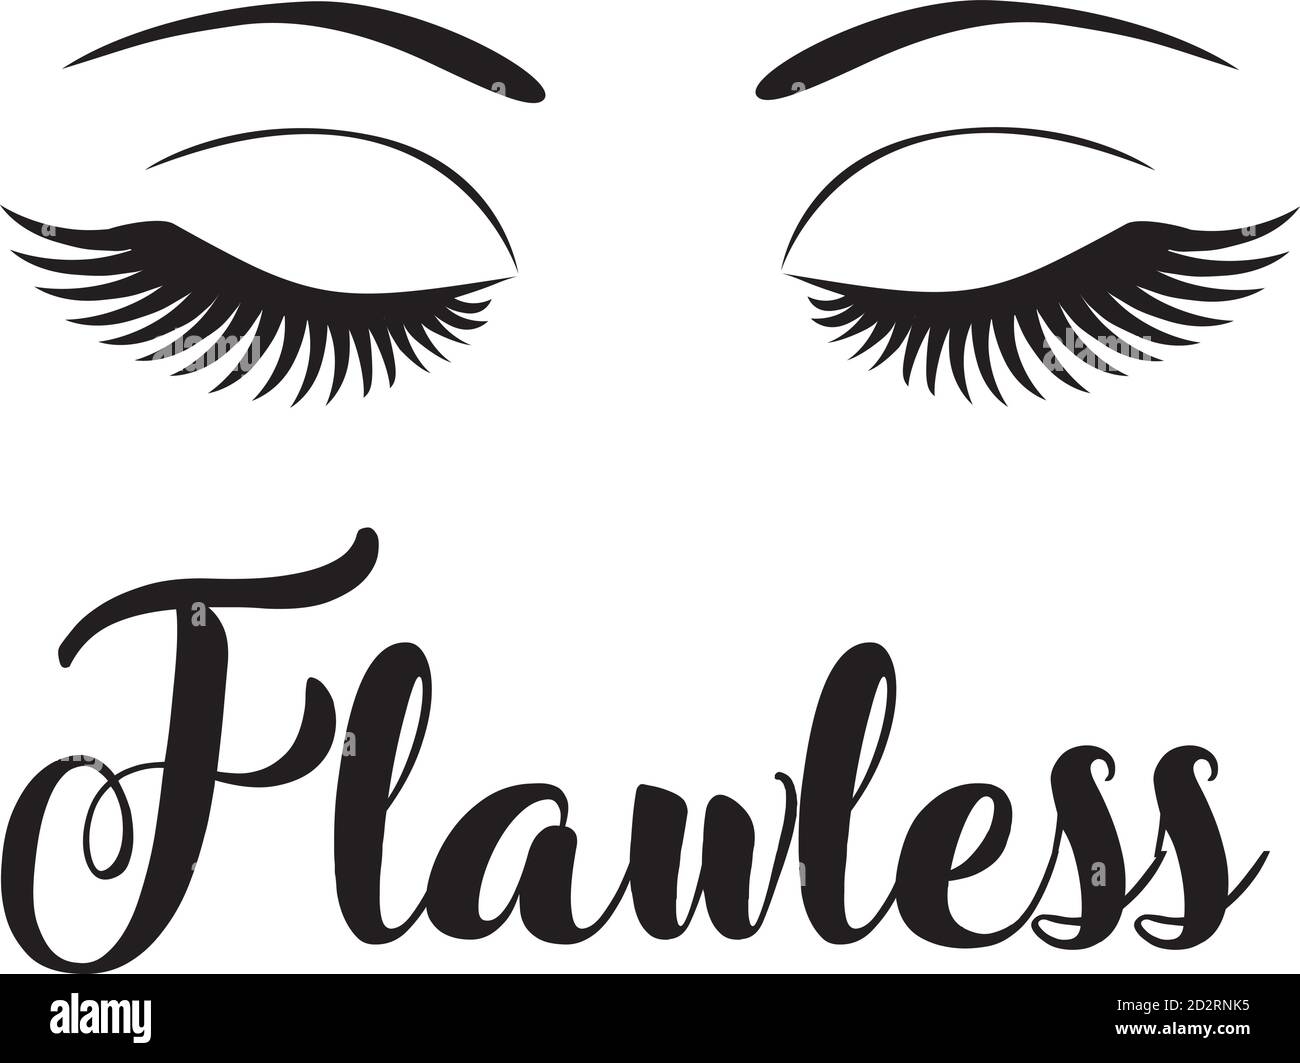 vector illustration of eyes with long lashes, flawless. Stock Vector